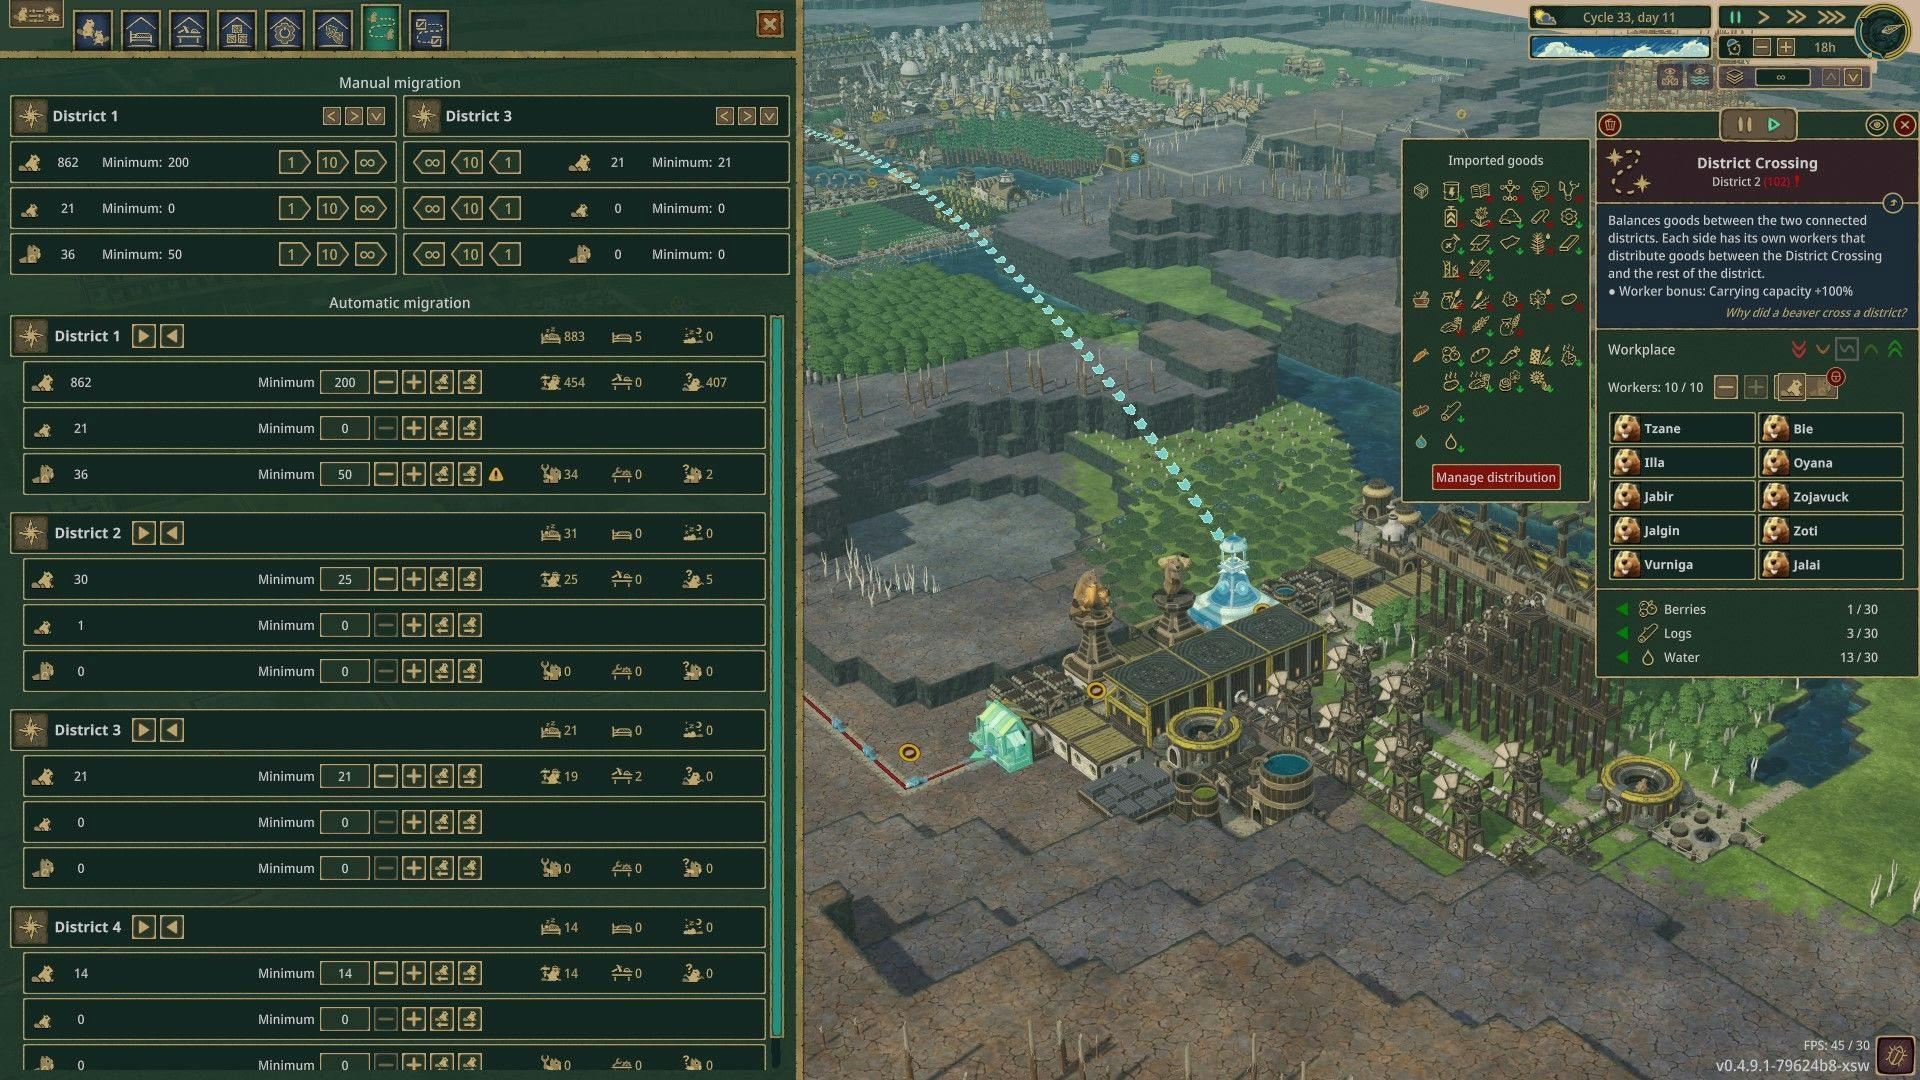 Timberborn UI with many windows and controls in game